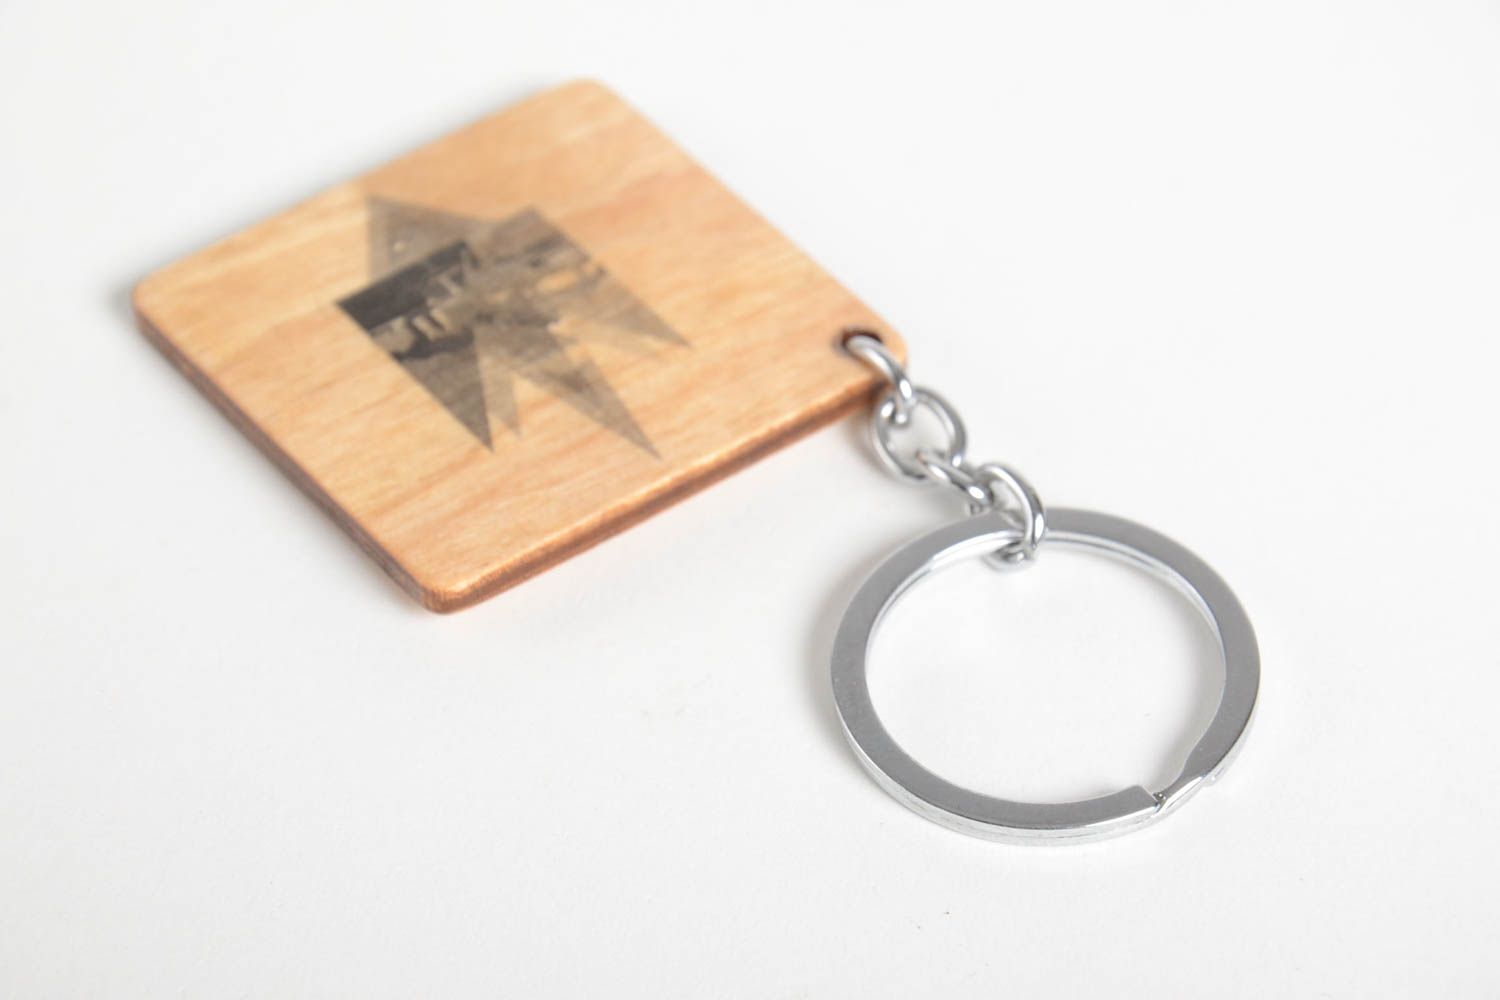 Homemade wooden keychain designer accessories key ring souvenir ideas cool gifts photo 4